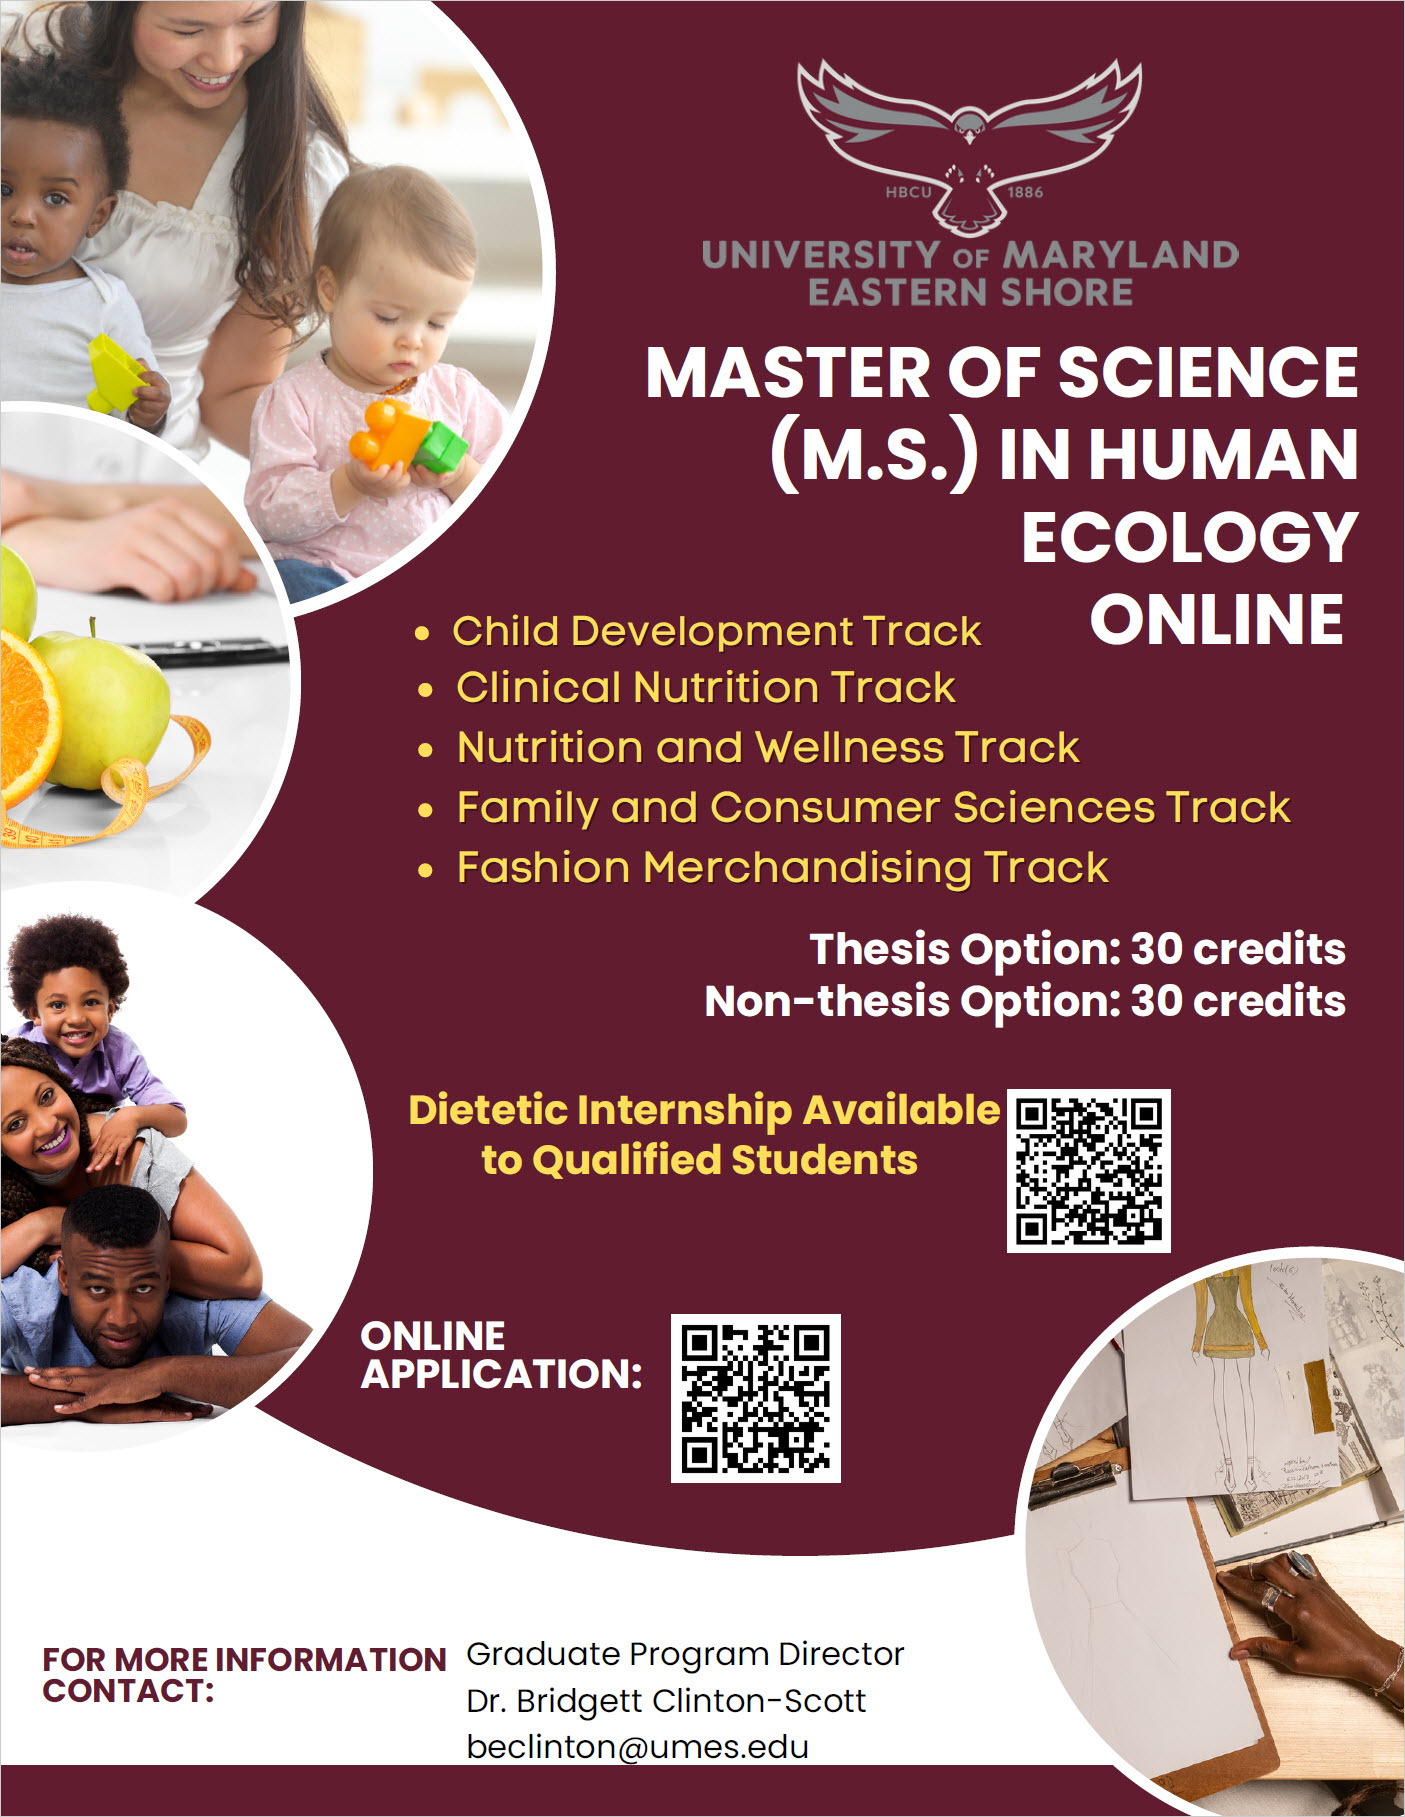 Child Development Track Clinical Nutrition Track Nutrition and Wellness Track Family and Consumer Sciences Track Fashion Merchandising Track Thesis Option: 30 credits Non-thesis Option: 30 credits MASTER OF SCIENCE (M.S.) IN HUMAN ECOLOGY ONLINE FOR MORE INFORMATION CONTACT: Graduate Program Director Dr. Bridgett Clinton-Scott beclinton@umes.edu ONLINE APPLICATION: Dietetic Internship Available to Qualified Students